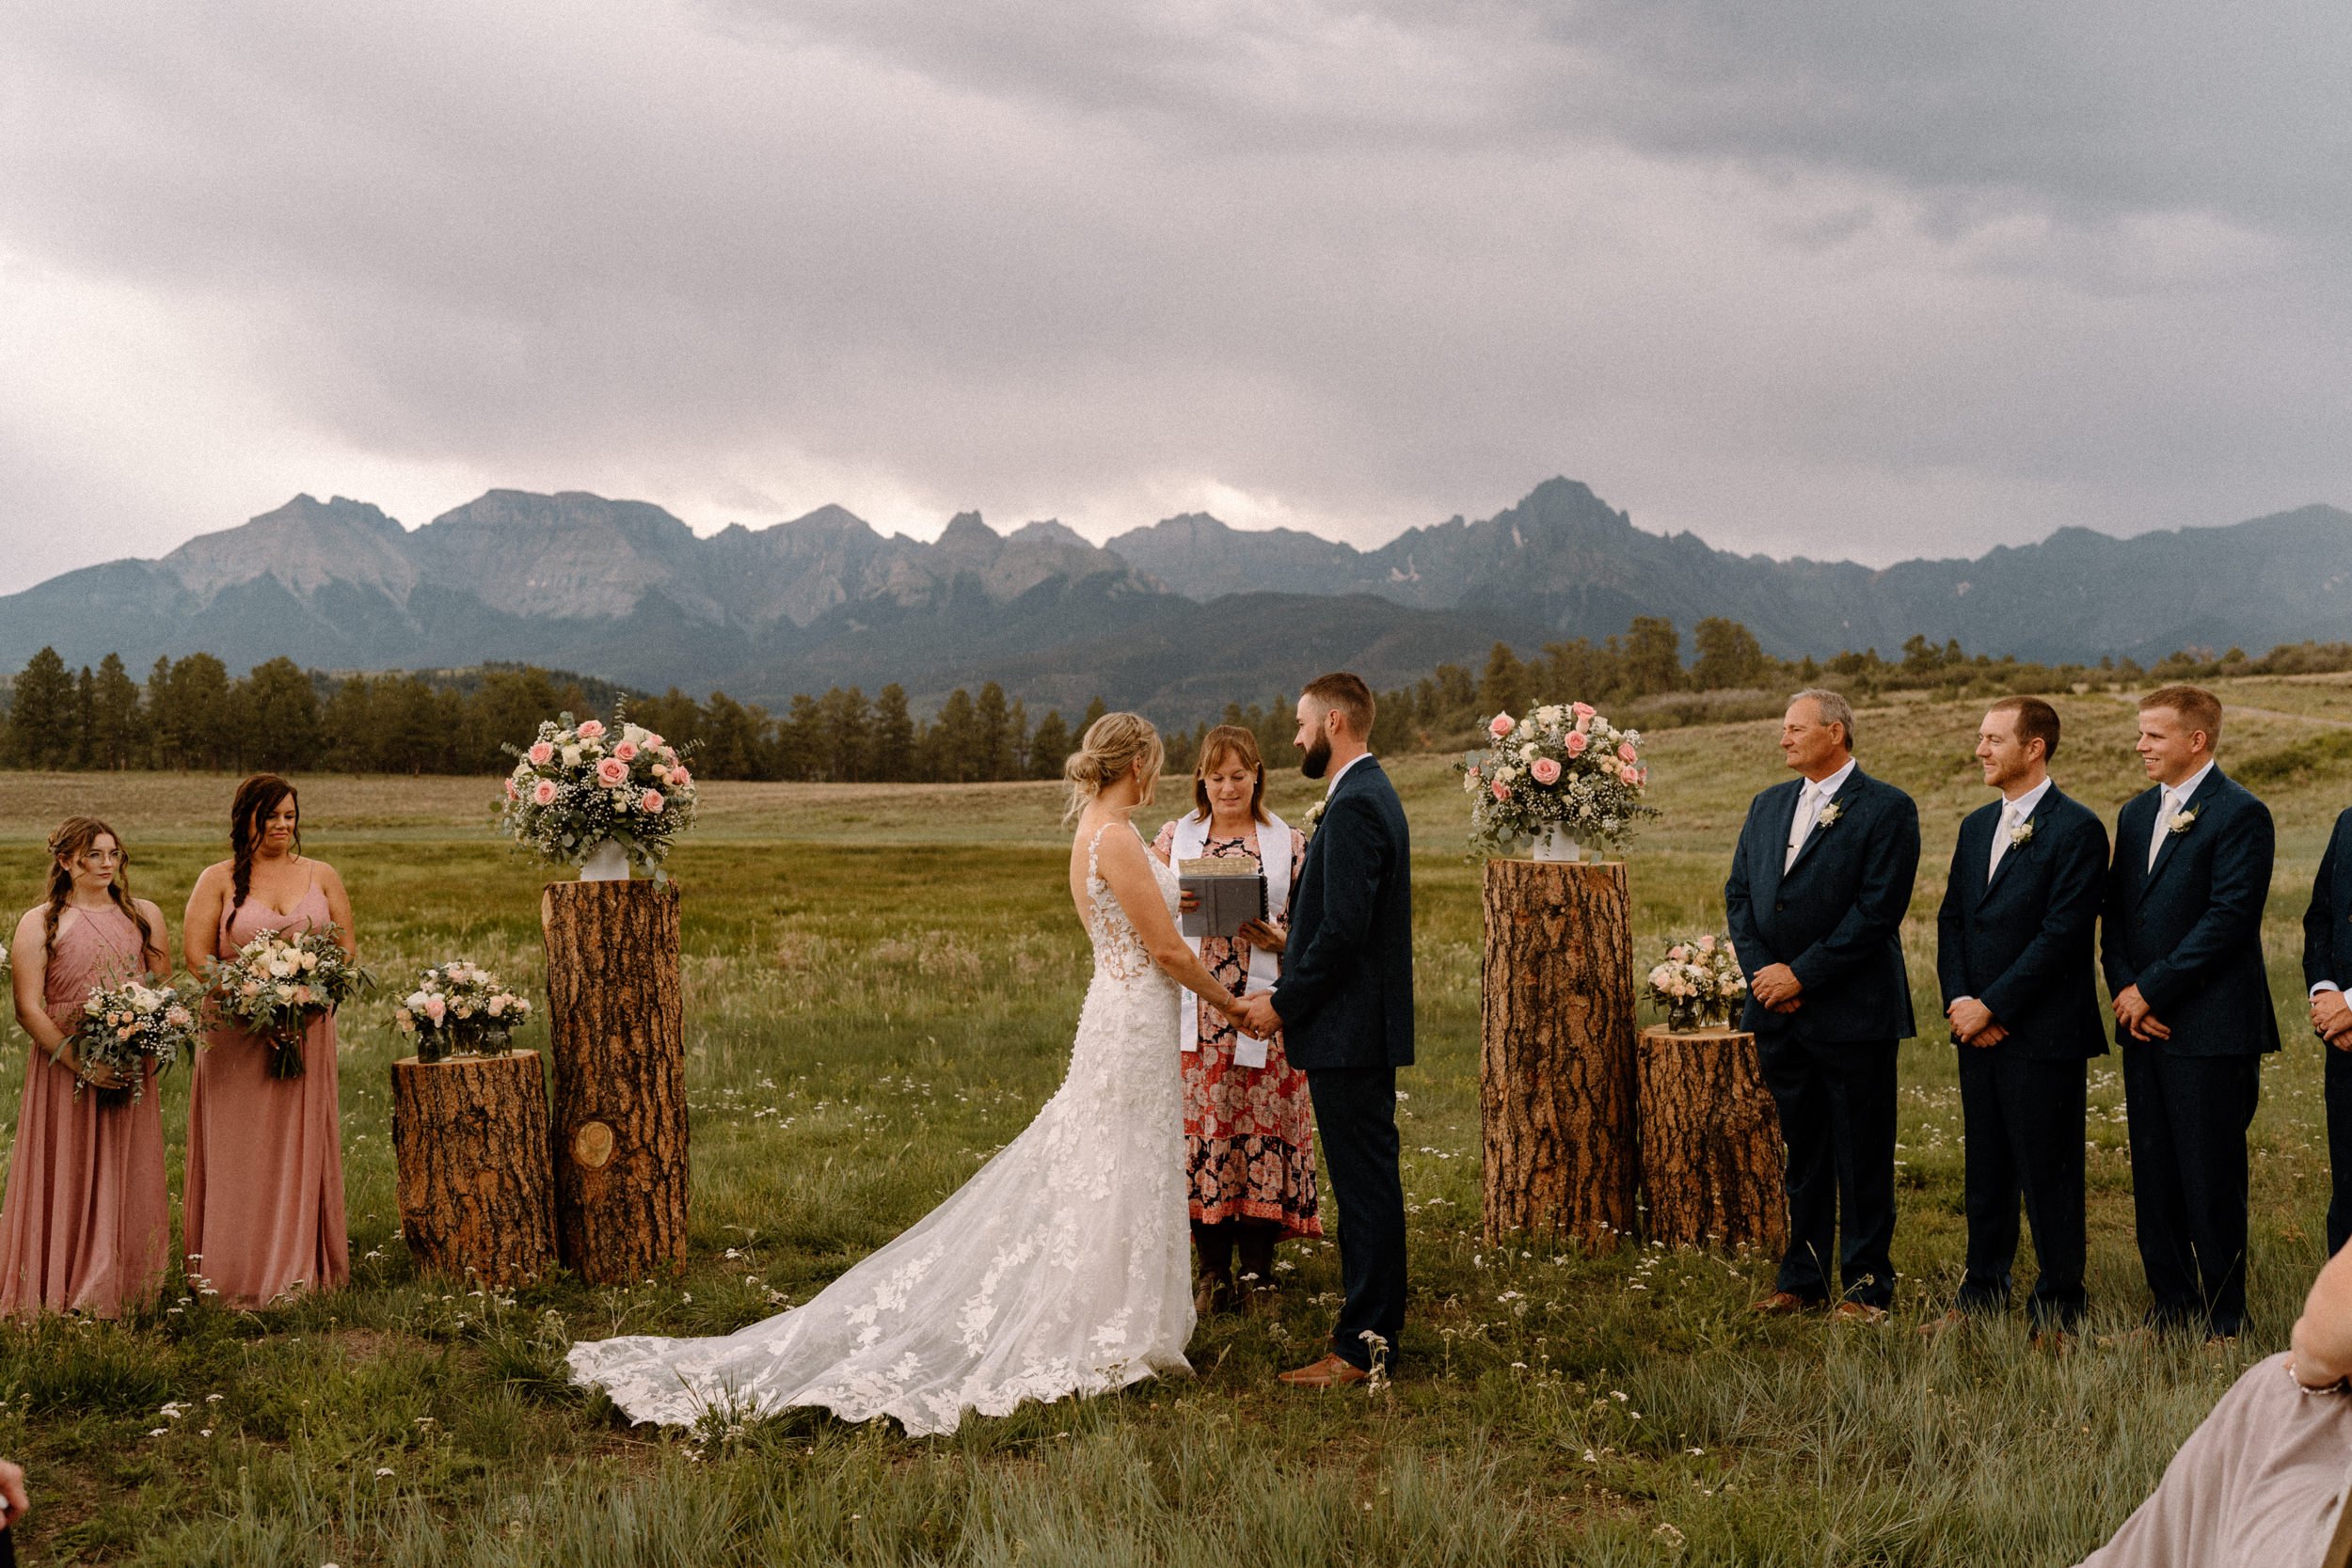 Bride and groom exchange vows at the altar at Top of the Pines in Ridgway, CO